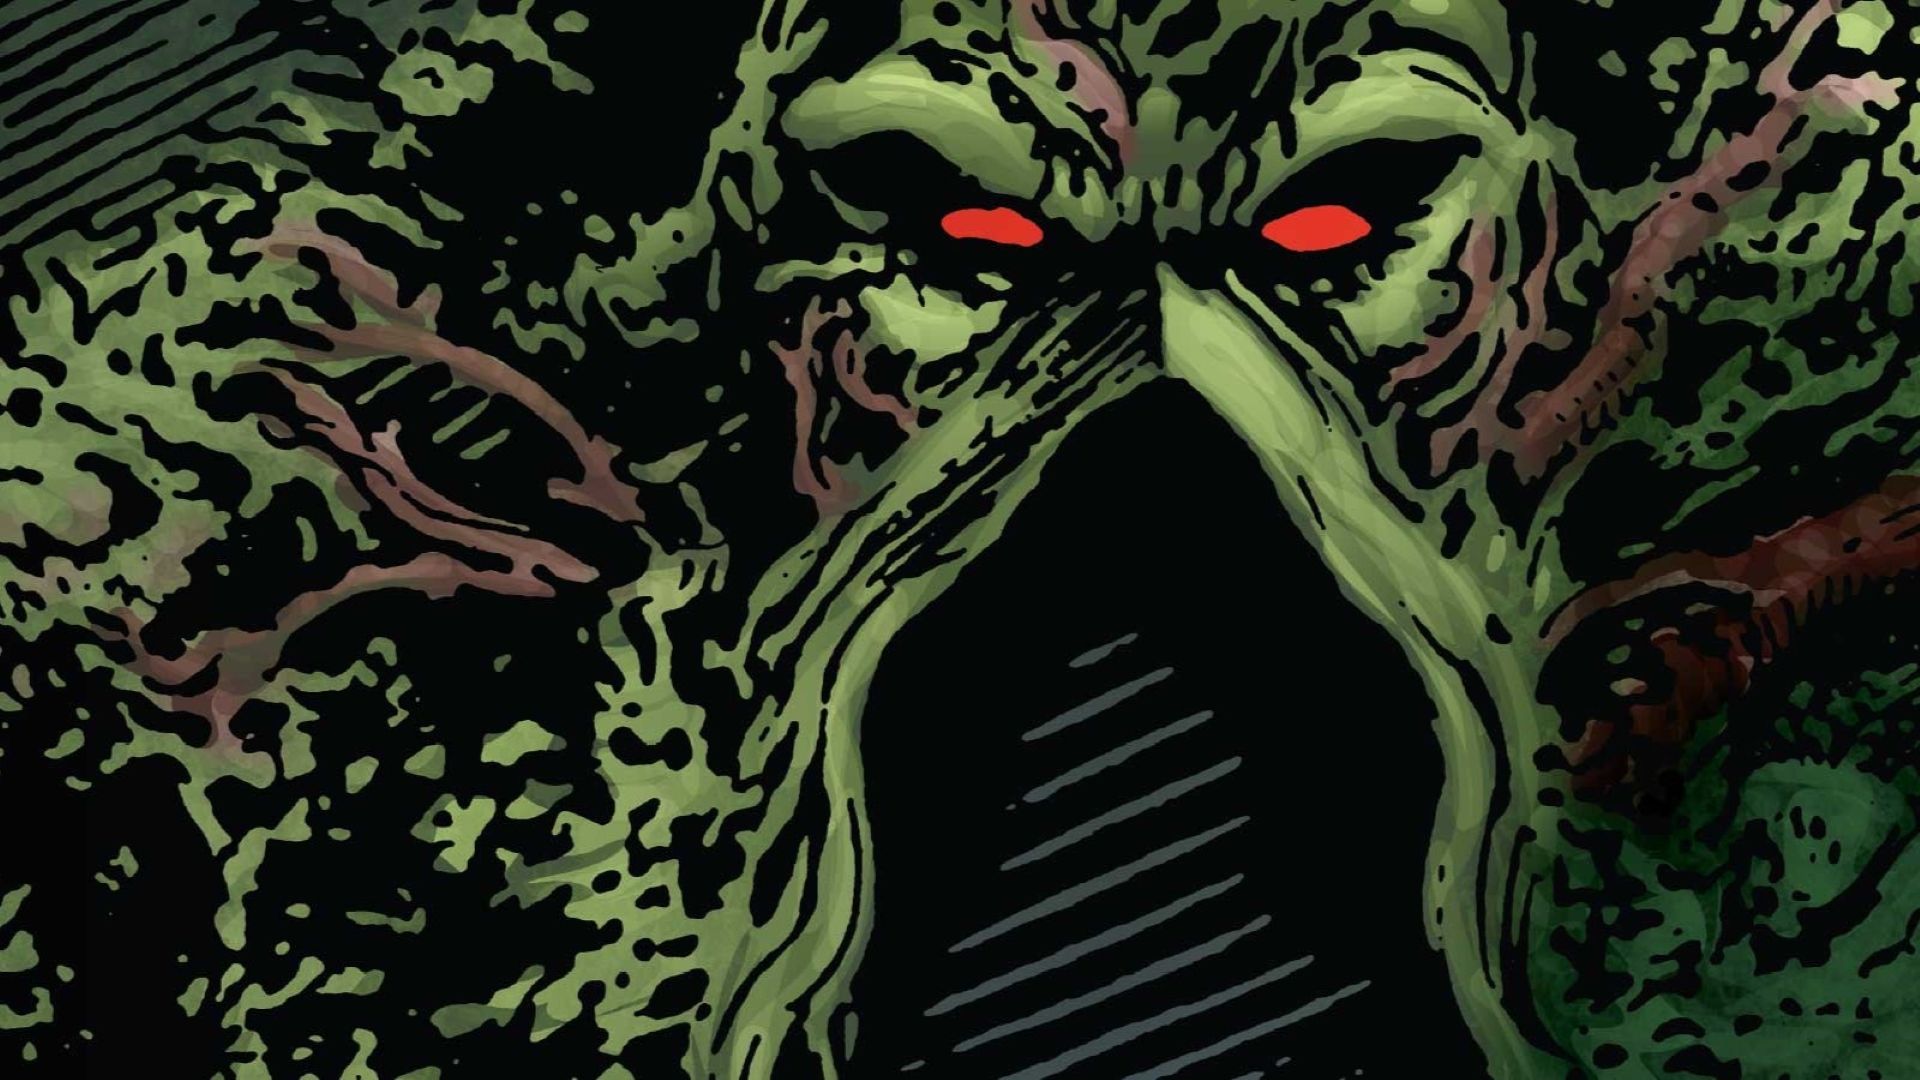 The Return of Swamp Thing background